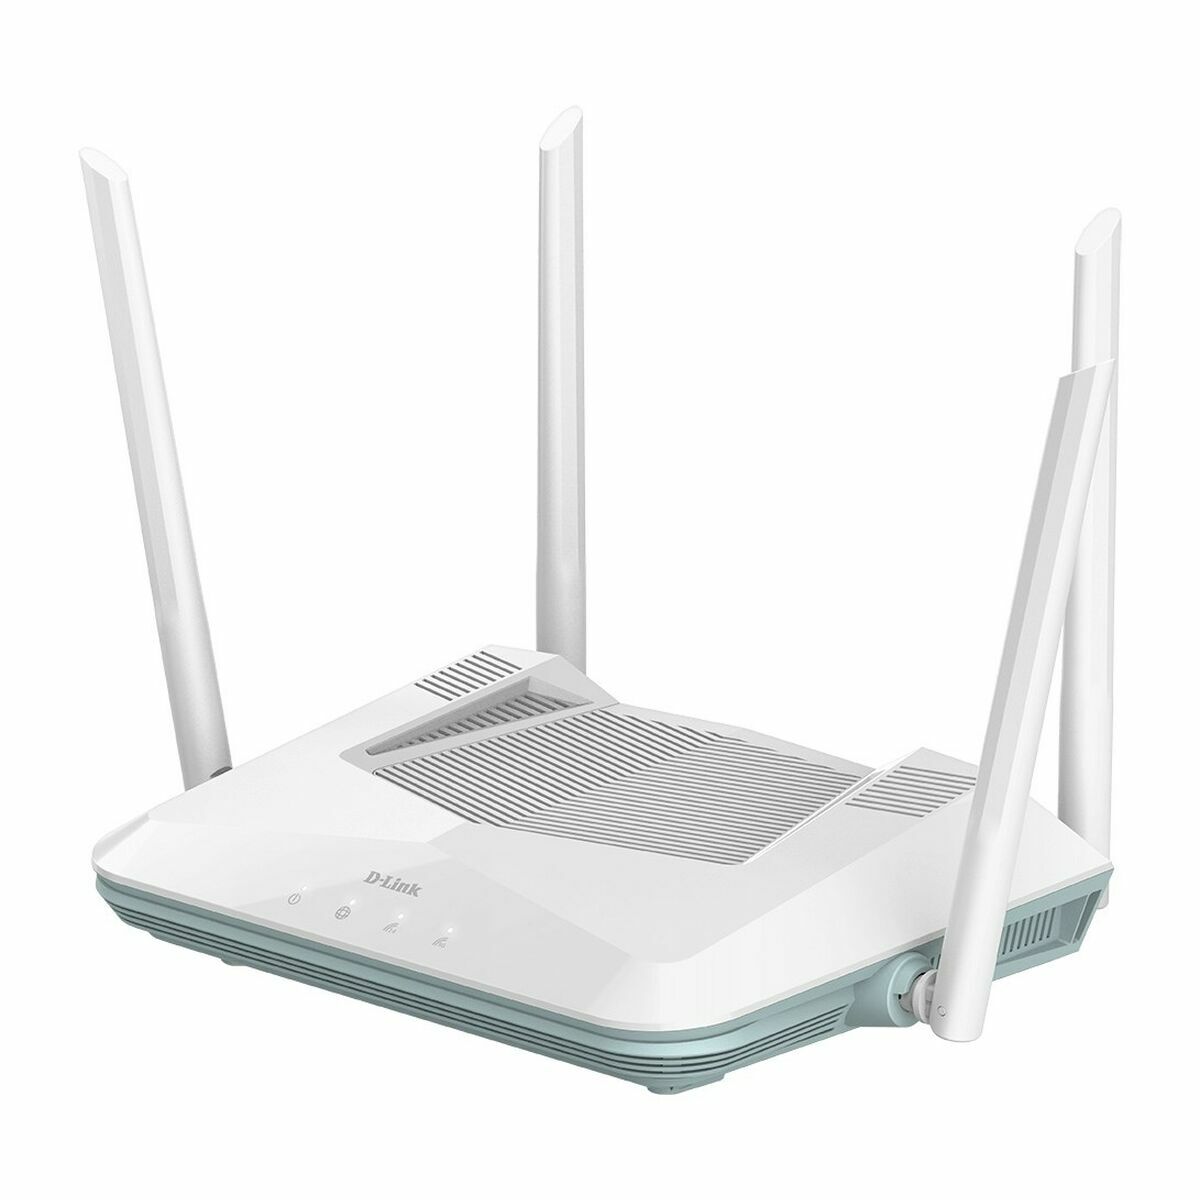 Router D-Link Ax3200, D-Link, Computing, Network devices, router-d-link-ax3200, Brand_D-Link, category-reference-2609, category-reference-2803, category-reference-2826, category-reference-t-19685, category-reference-t-19914, category-reference-t-21371, Condition_NEW, networks/wiring, Price_100 - 200, Teleworking, RiotNook